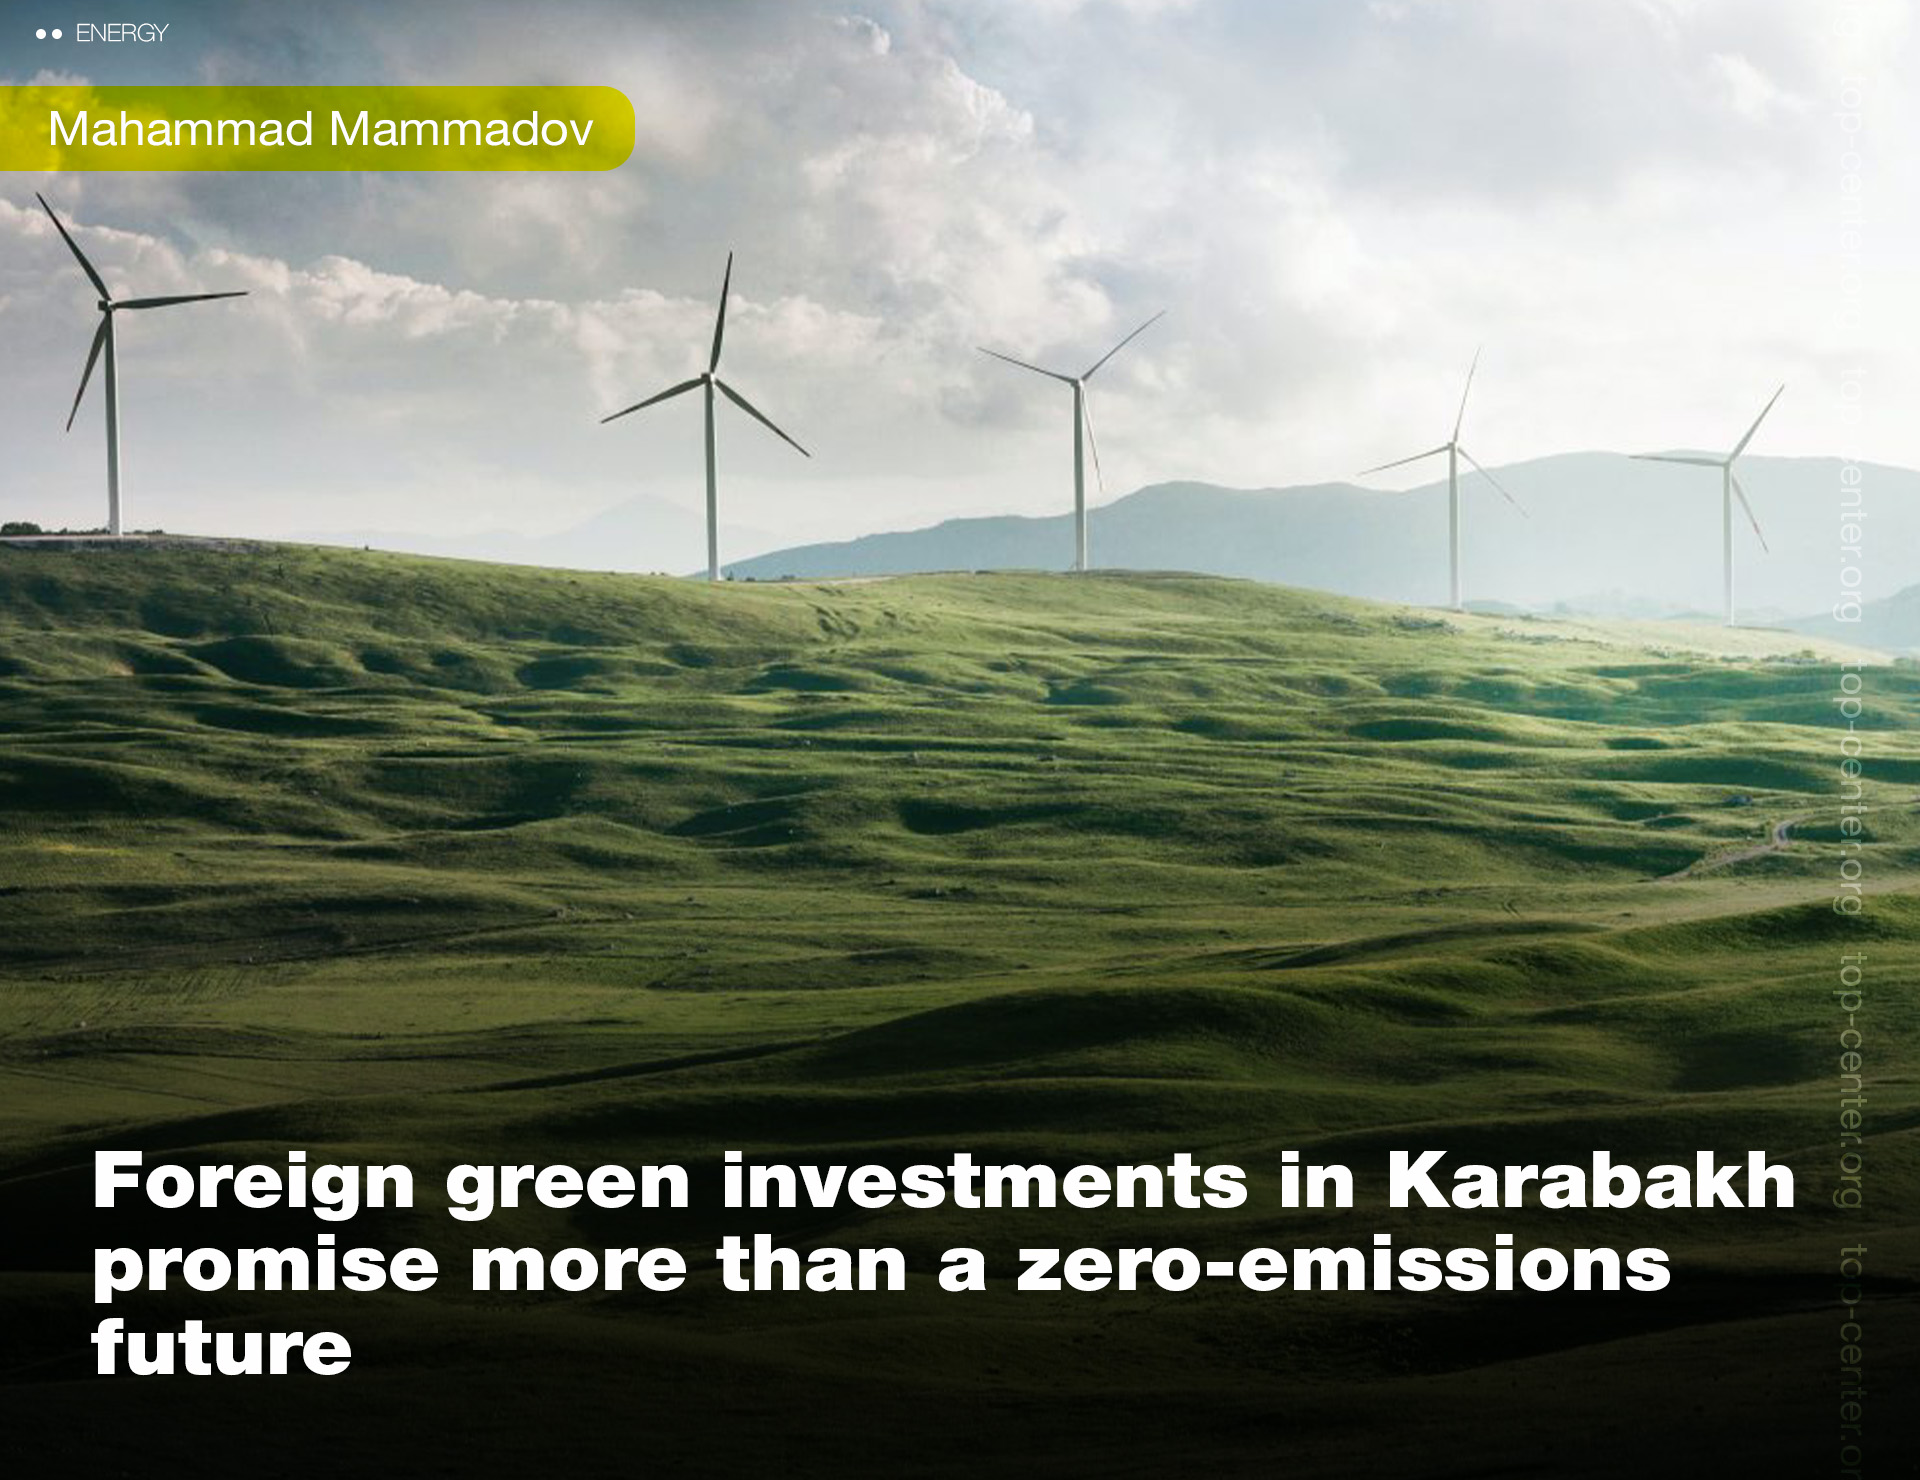 Foreign green investments in Karabakh promise more than a zero-emissions future